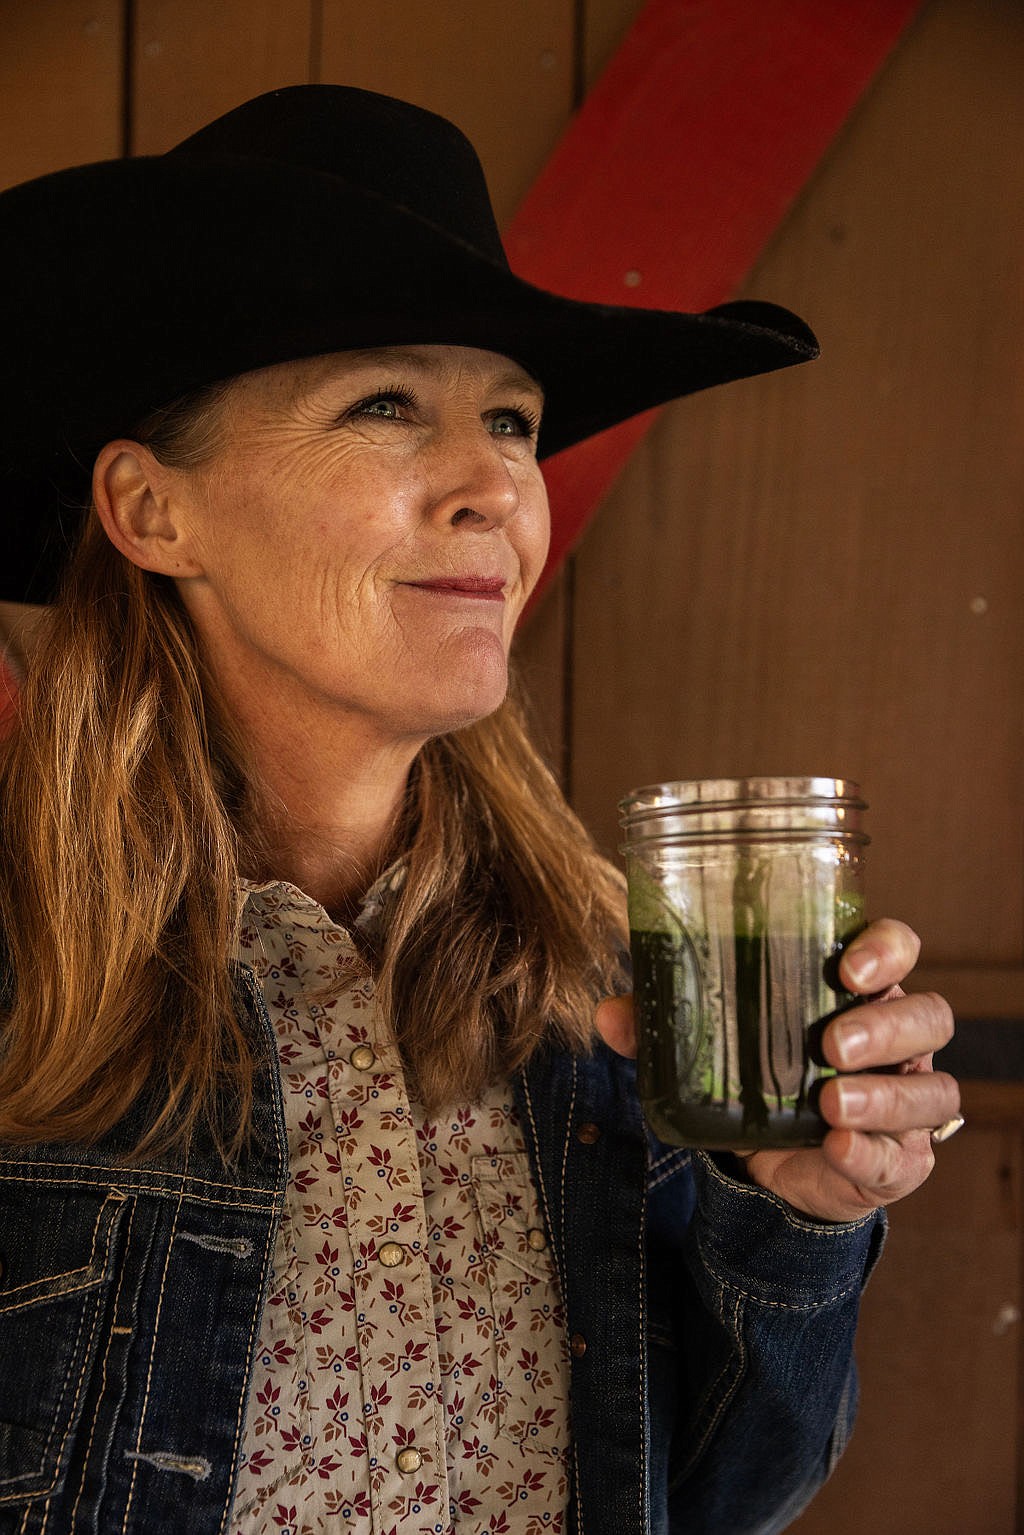 Elizabeth Nelson is the founder of Farm Fueled Nutrition, a new superfood powder. (Photo courtesy of William Reed)